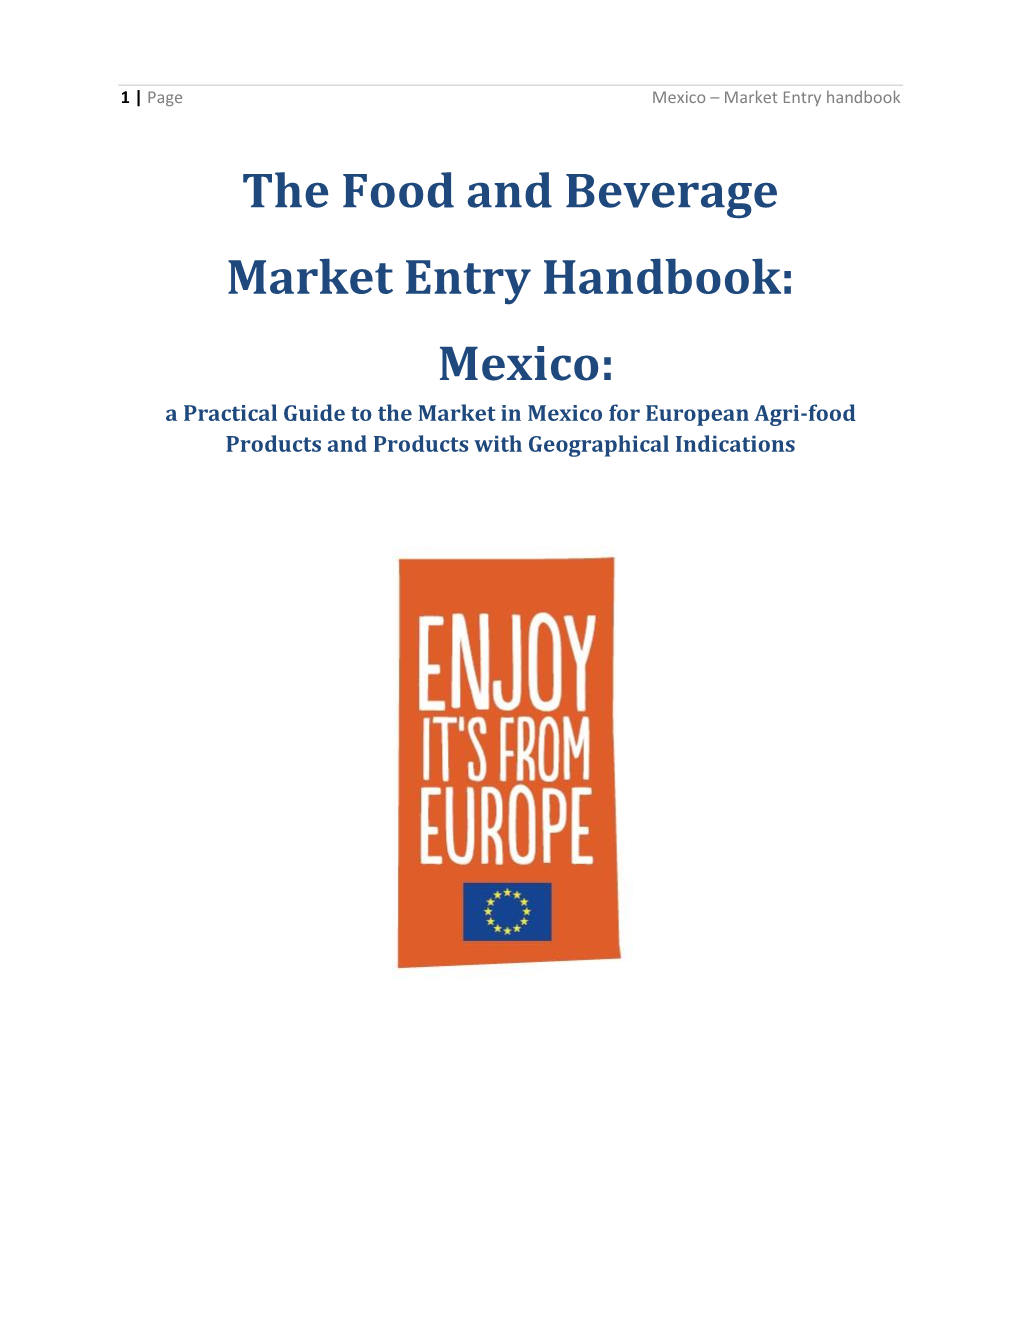 The Food and Beverage Market Entry Handbook: Mexico